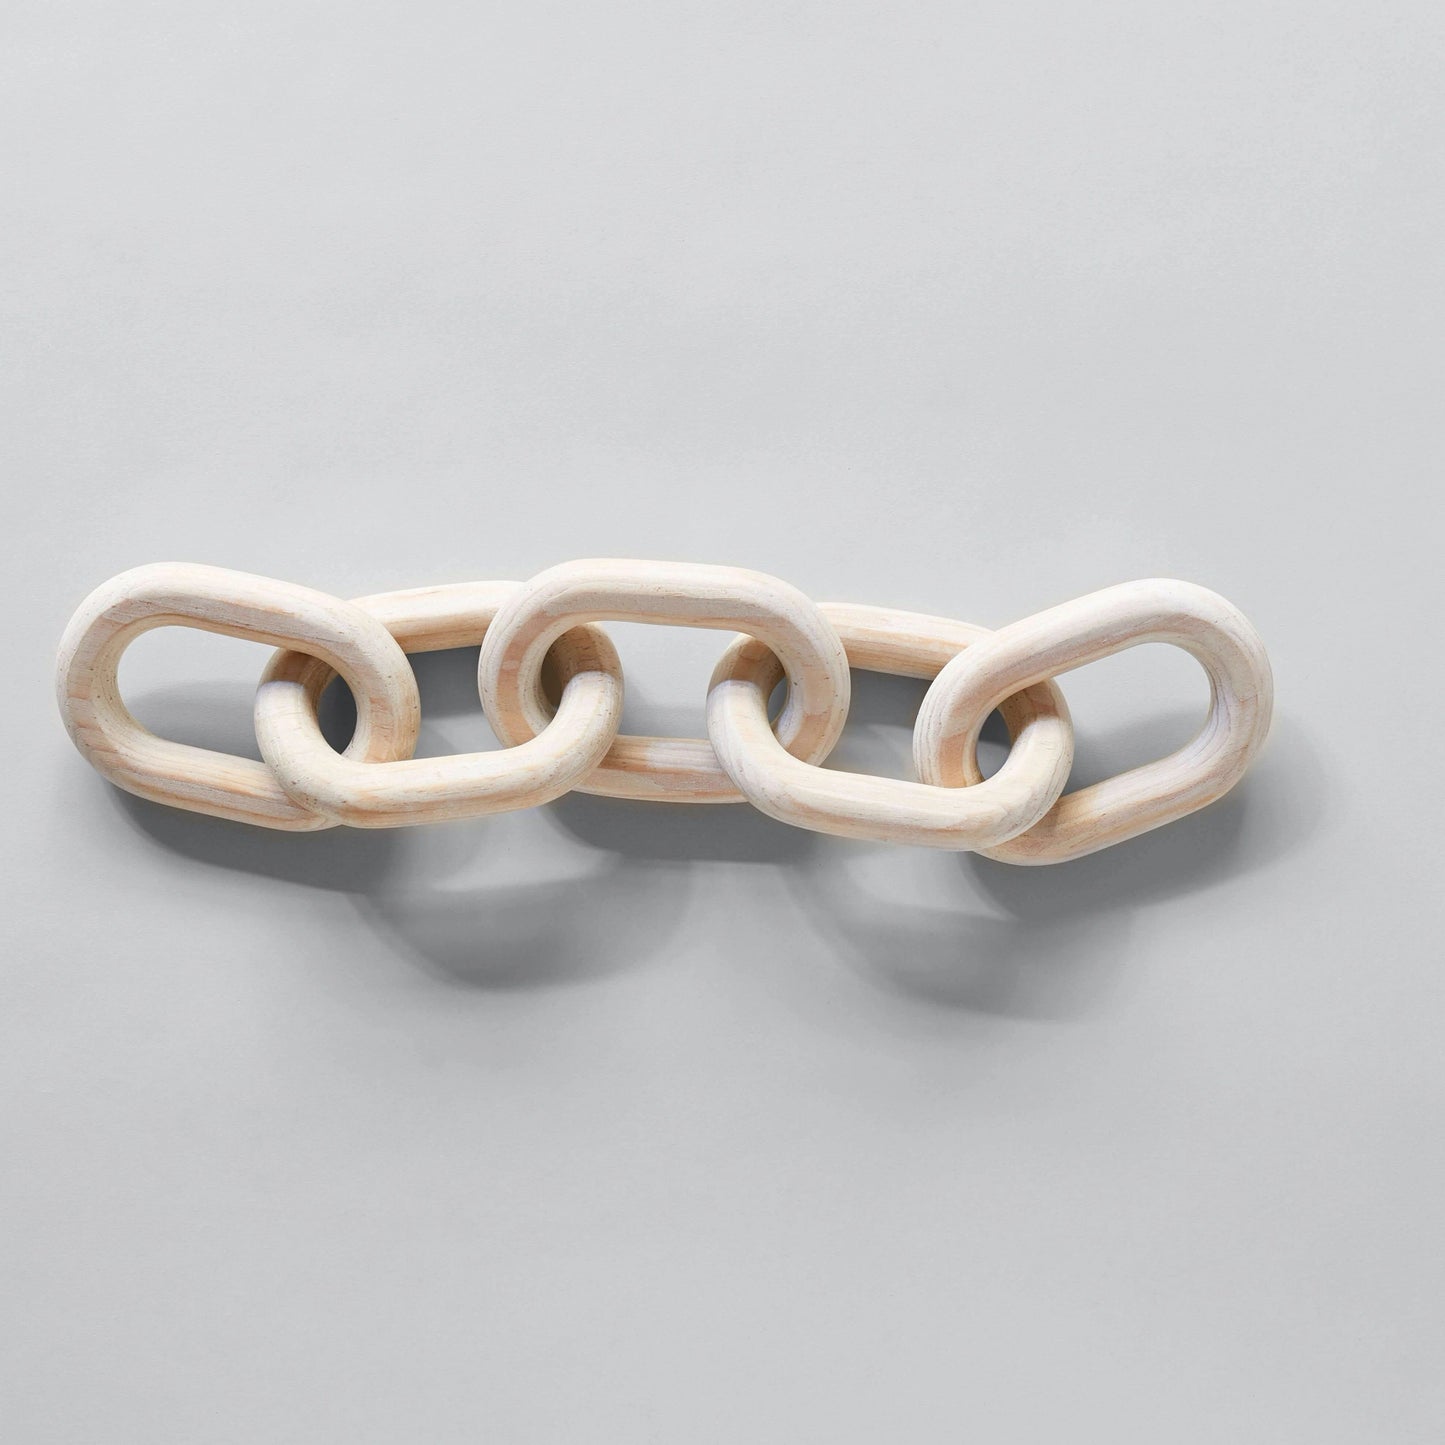 Pale Wood Chain - Small Link